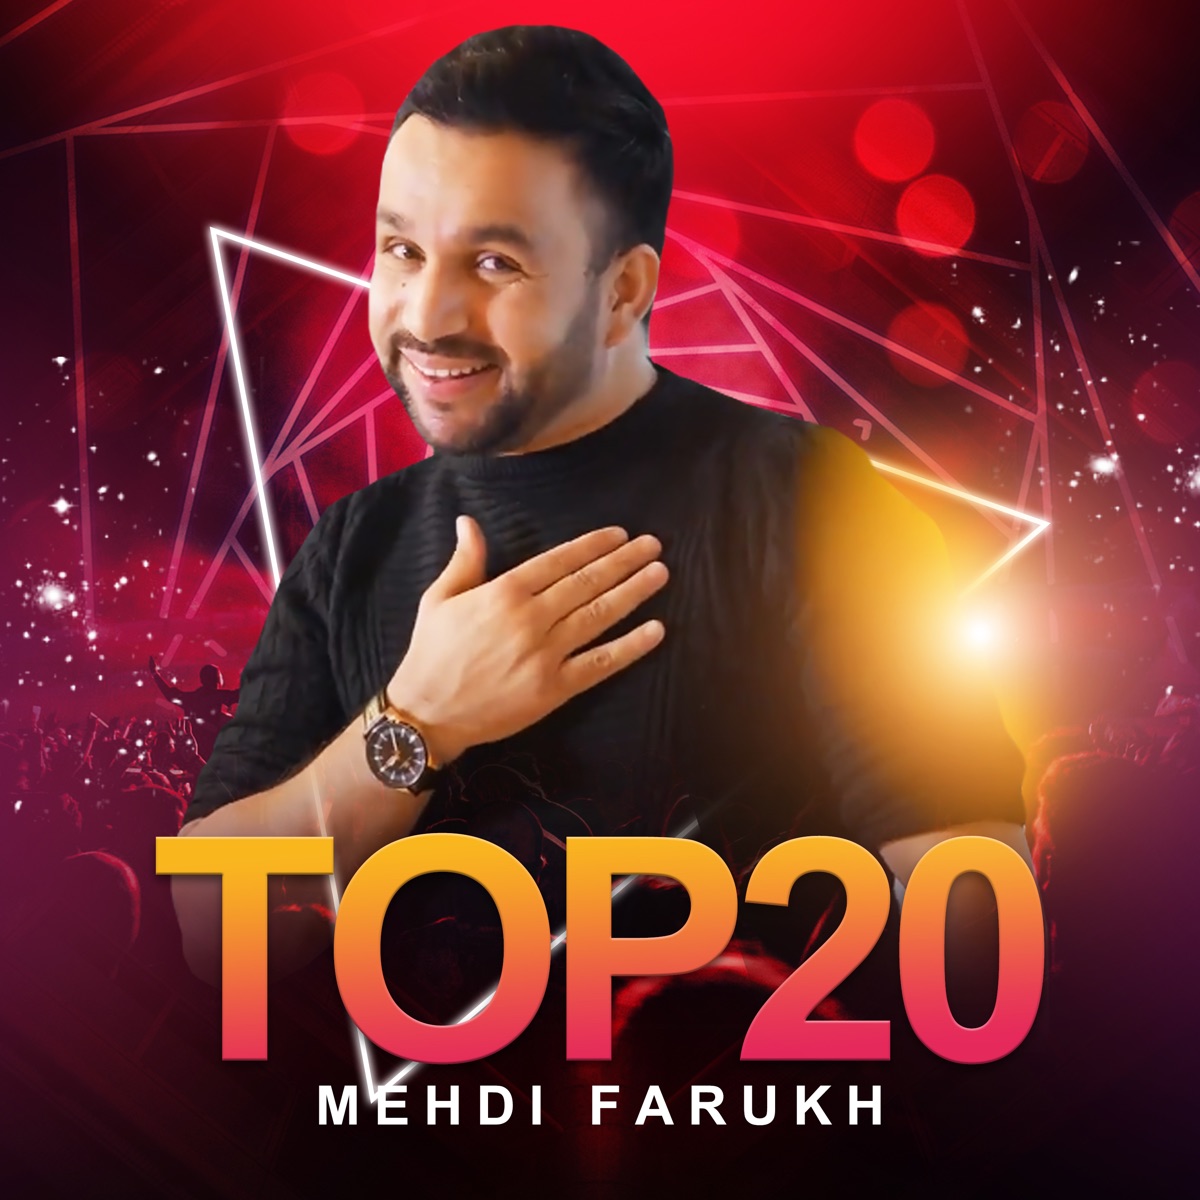 Top 20 by Mehdi Farukh on Apple Music